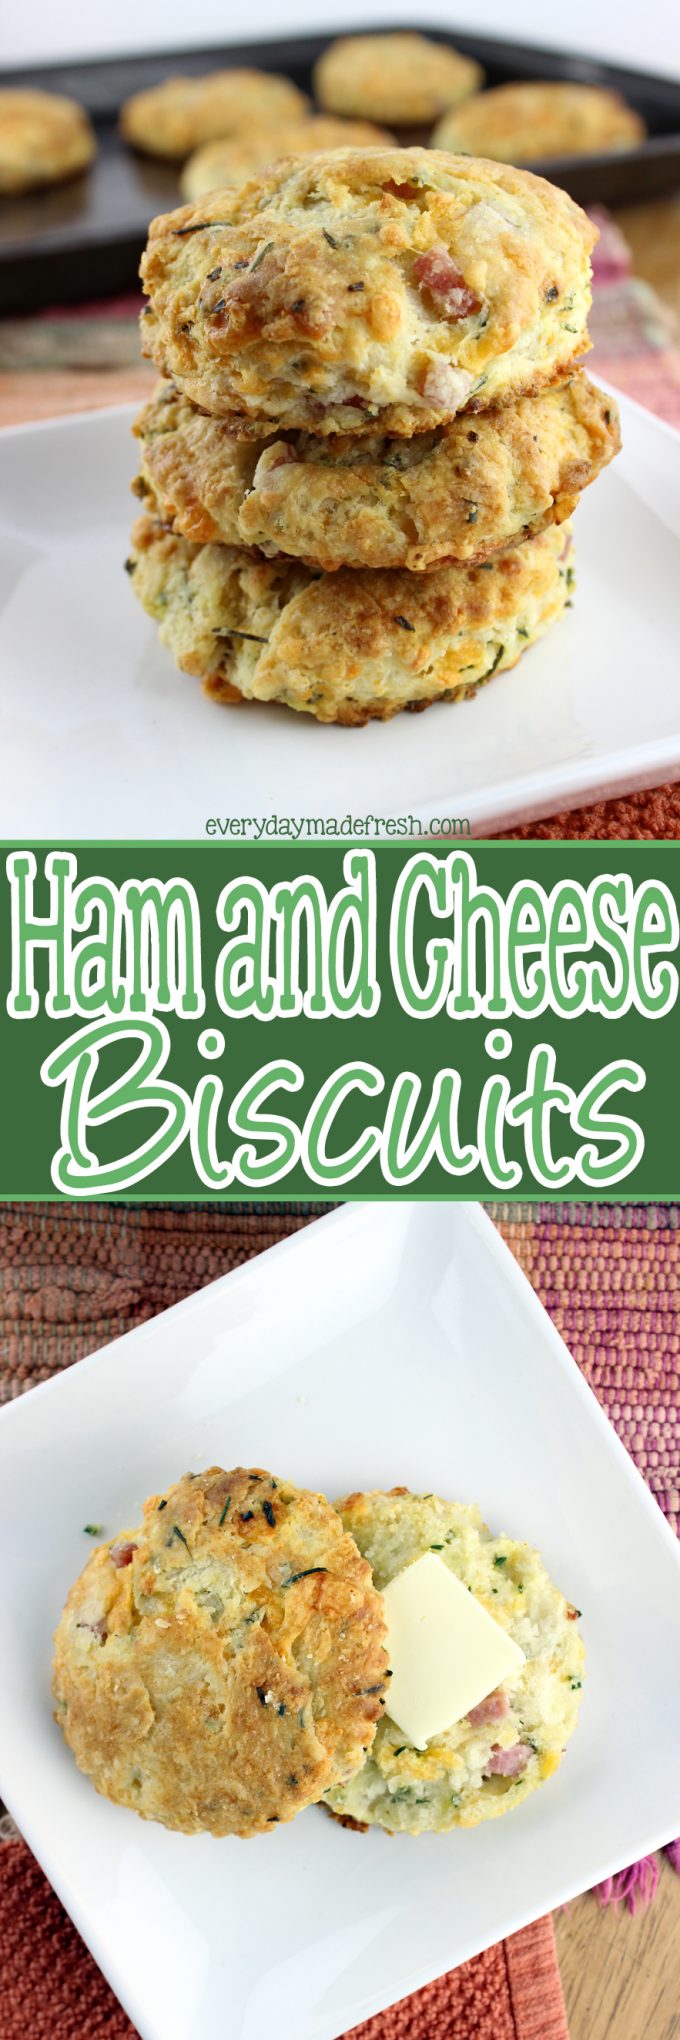 Who doesn't love a fluffy homemade buttermilk biscuit? Ok, so who wants a simple to make fluffy homemade buttermilk biscuit with chunks of ham and cheese? These Ham and Cheese Biscuits are everything you'd ever want in a biscuit! | EverydayMadeFresh.com